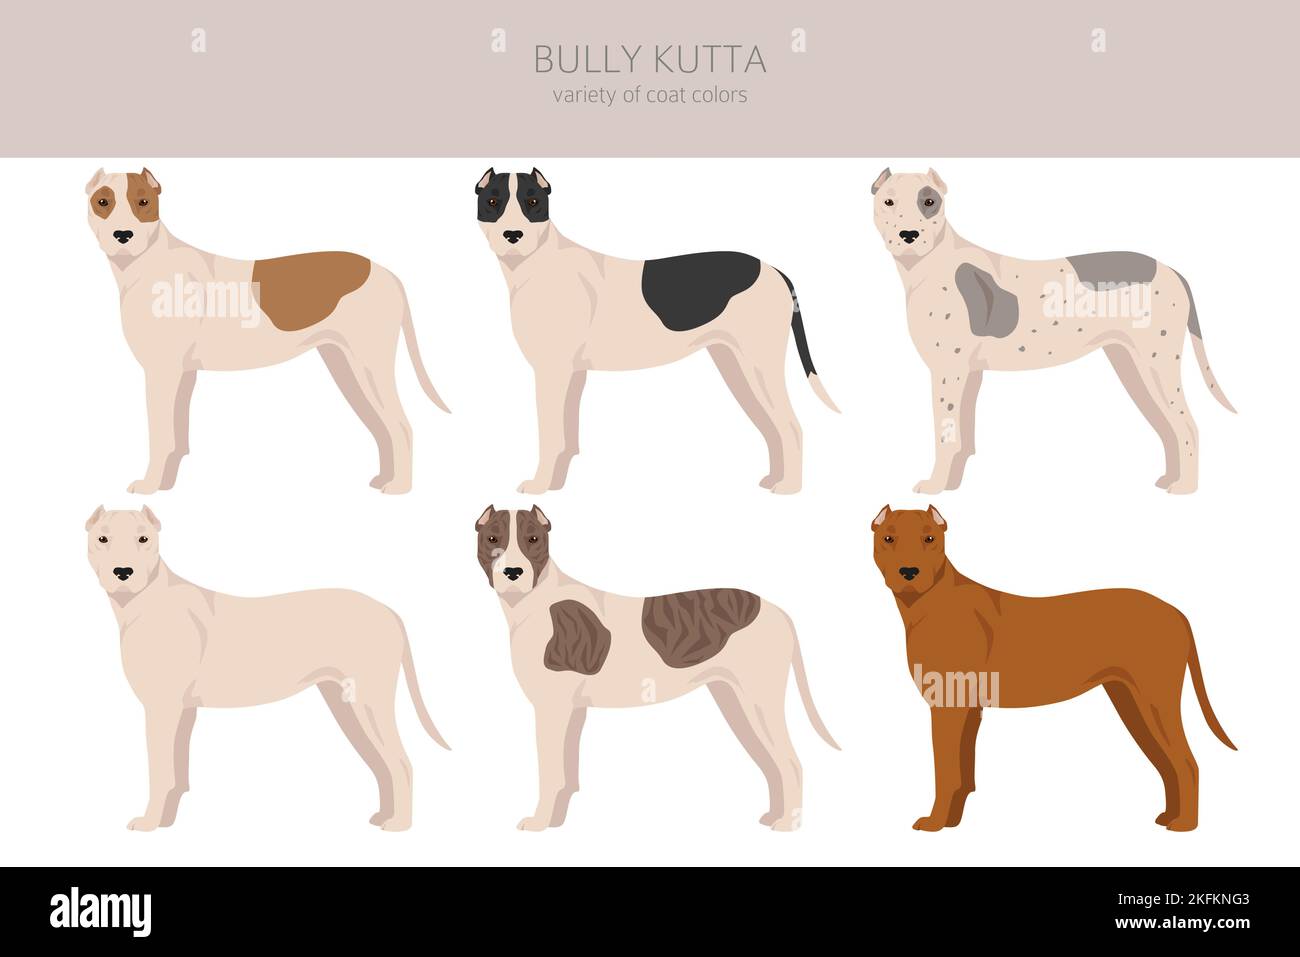 Bully Kutta clipart. Different coat colors and poses set.  Vector illustration Stock Vector